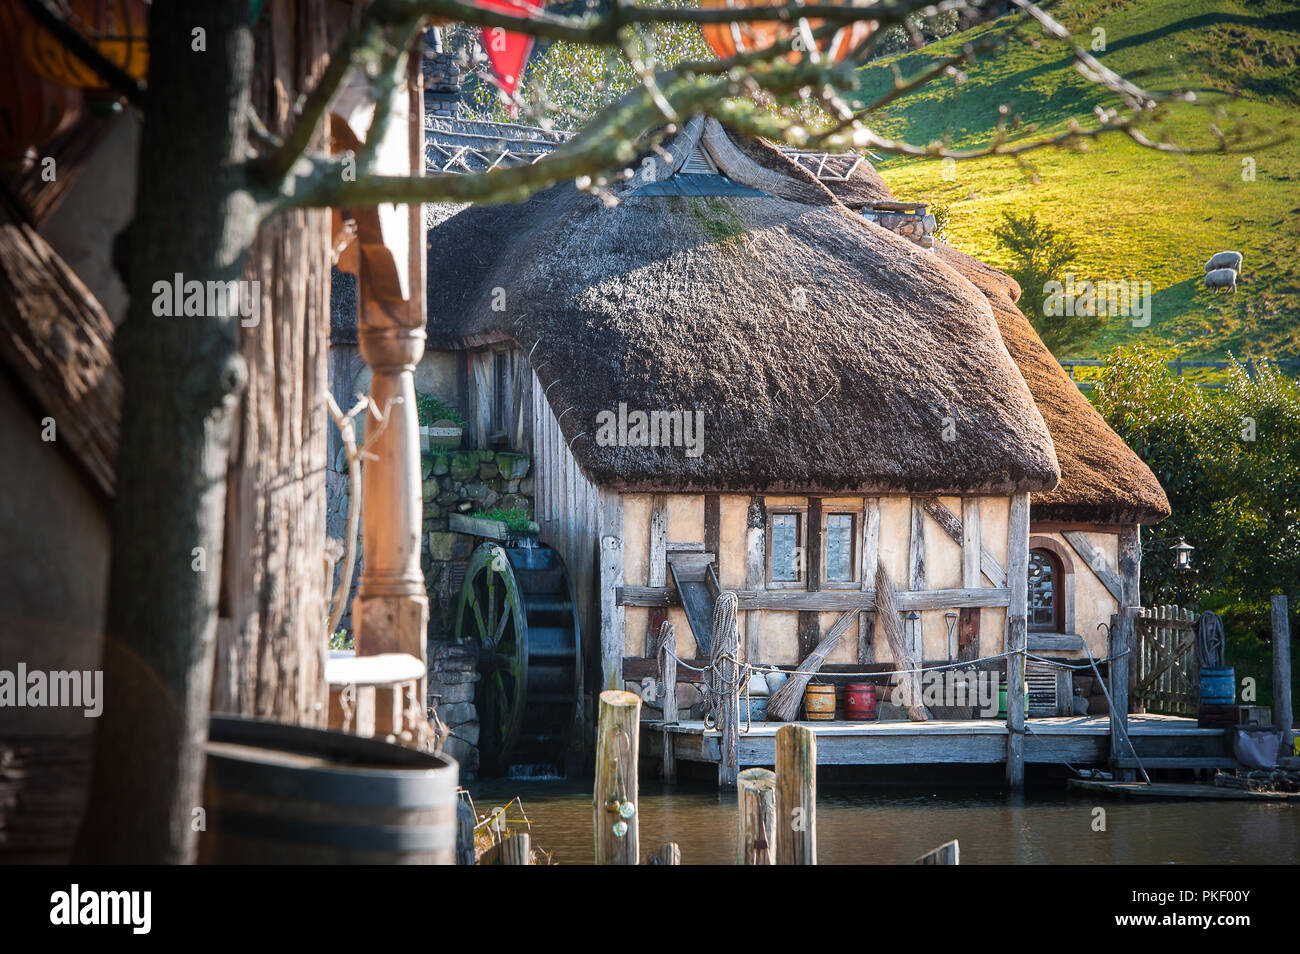 Hobbiton movie set created to film Lord of the Rings and The Hobbit. View of the watermill at sunset. Stock Photo